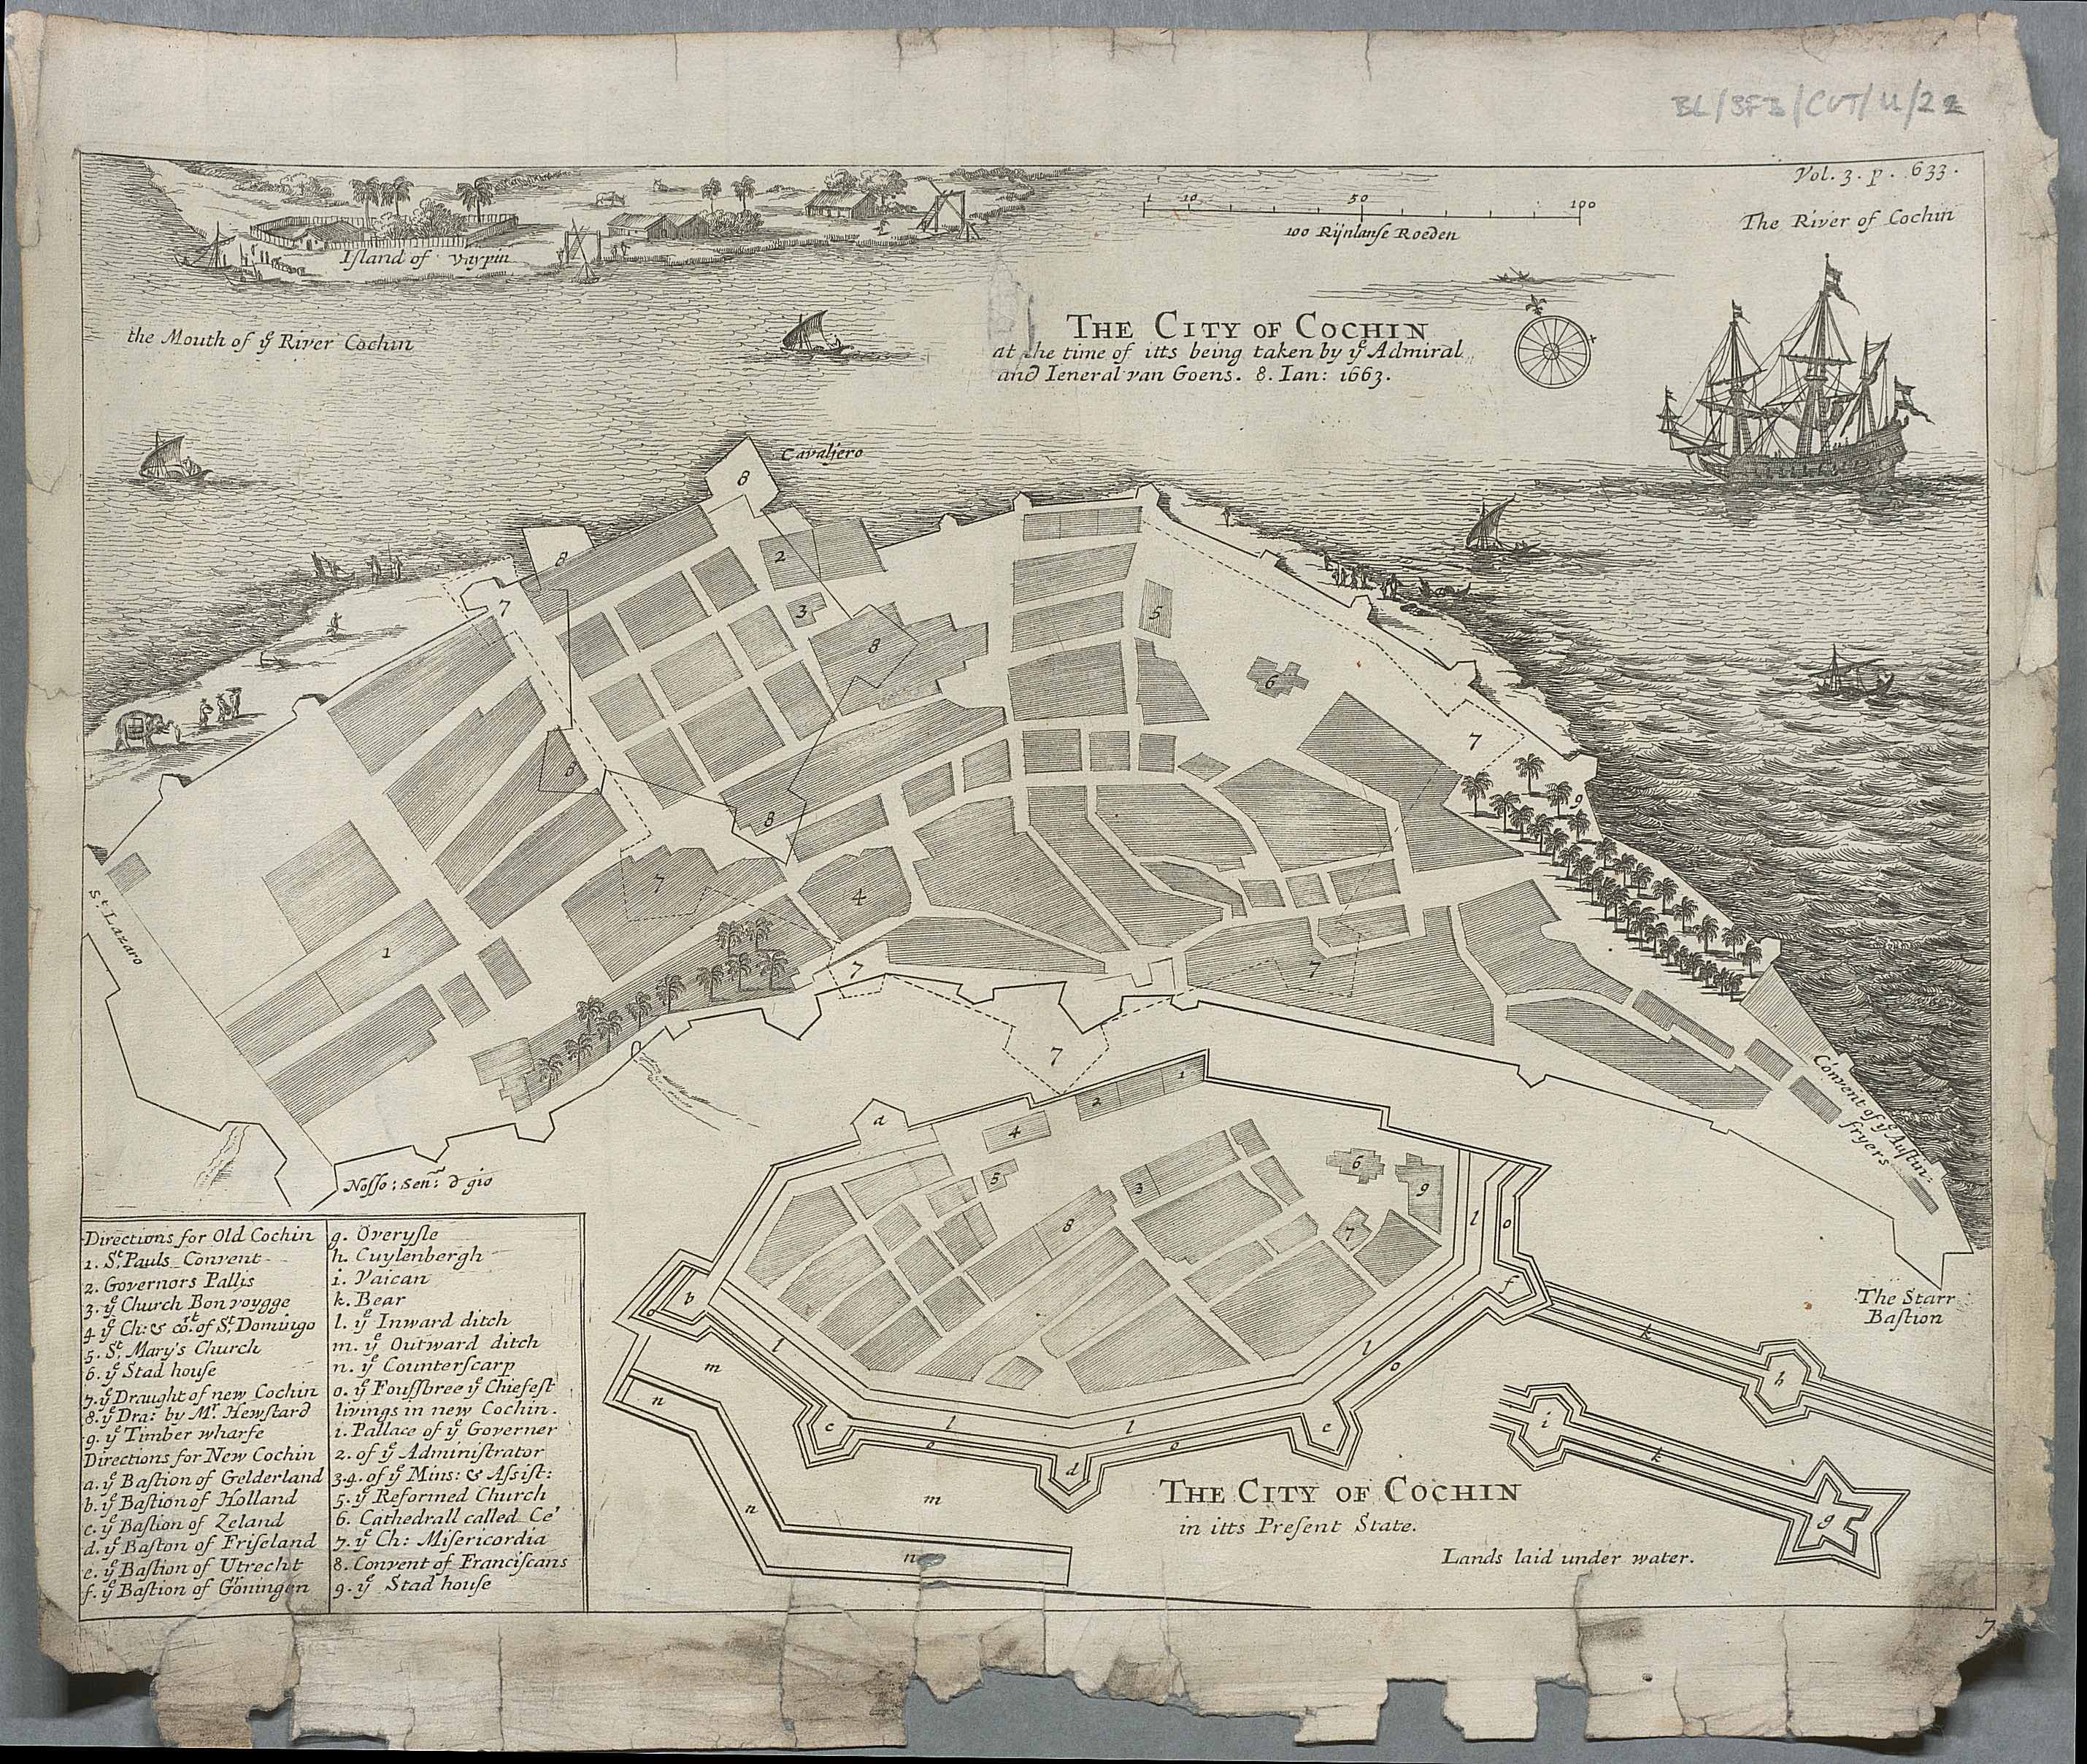 The majority of the map print shows a historical cityplan for the city of Cochin. Trees, people, animals, buildings and ditches feature on the townplan.  At the top of the map print is the Island of Vitypin and trees, buildings, boats and people are shown on the island. Between the city of Cochin and the Island of Vitypin is the mouth of the River Cochin. On the river and sea are five ships. On the lower left of the map print is a legend of 9 places for Old Cochin (1-9), 14 places in New Cochin(a-o) and 8 places in the Governor's Palace (1-8). All are numbered or lettered and the numbers and letters are present on the cityplan. There is a compass in the top right corner. 